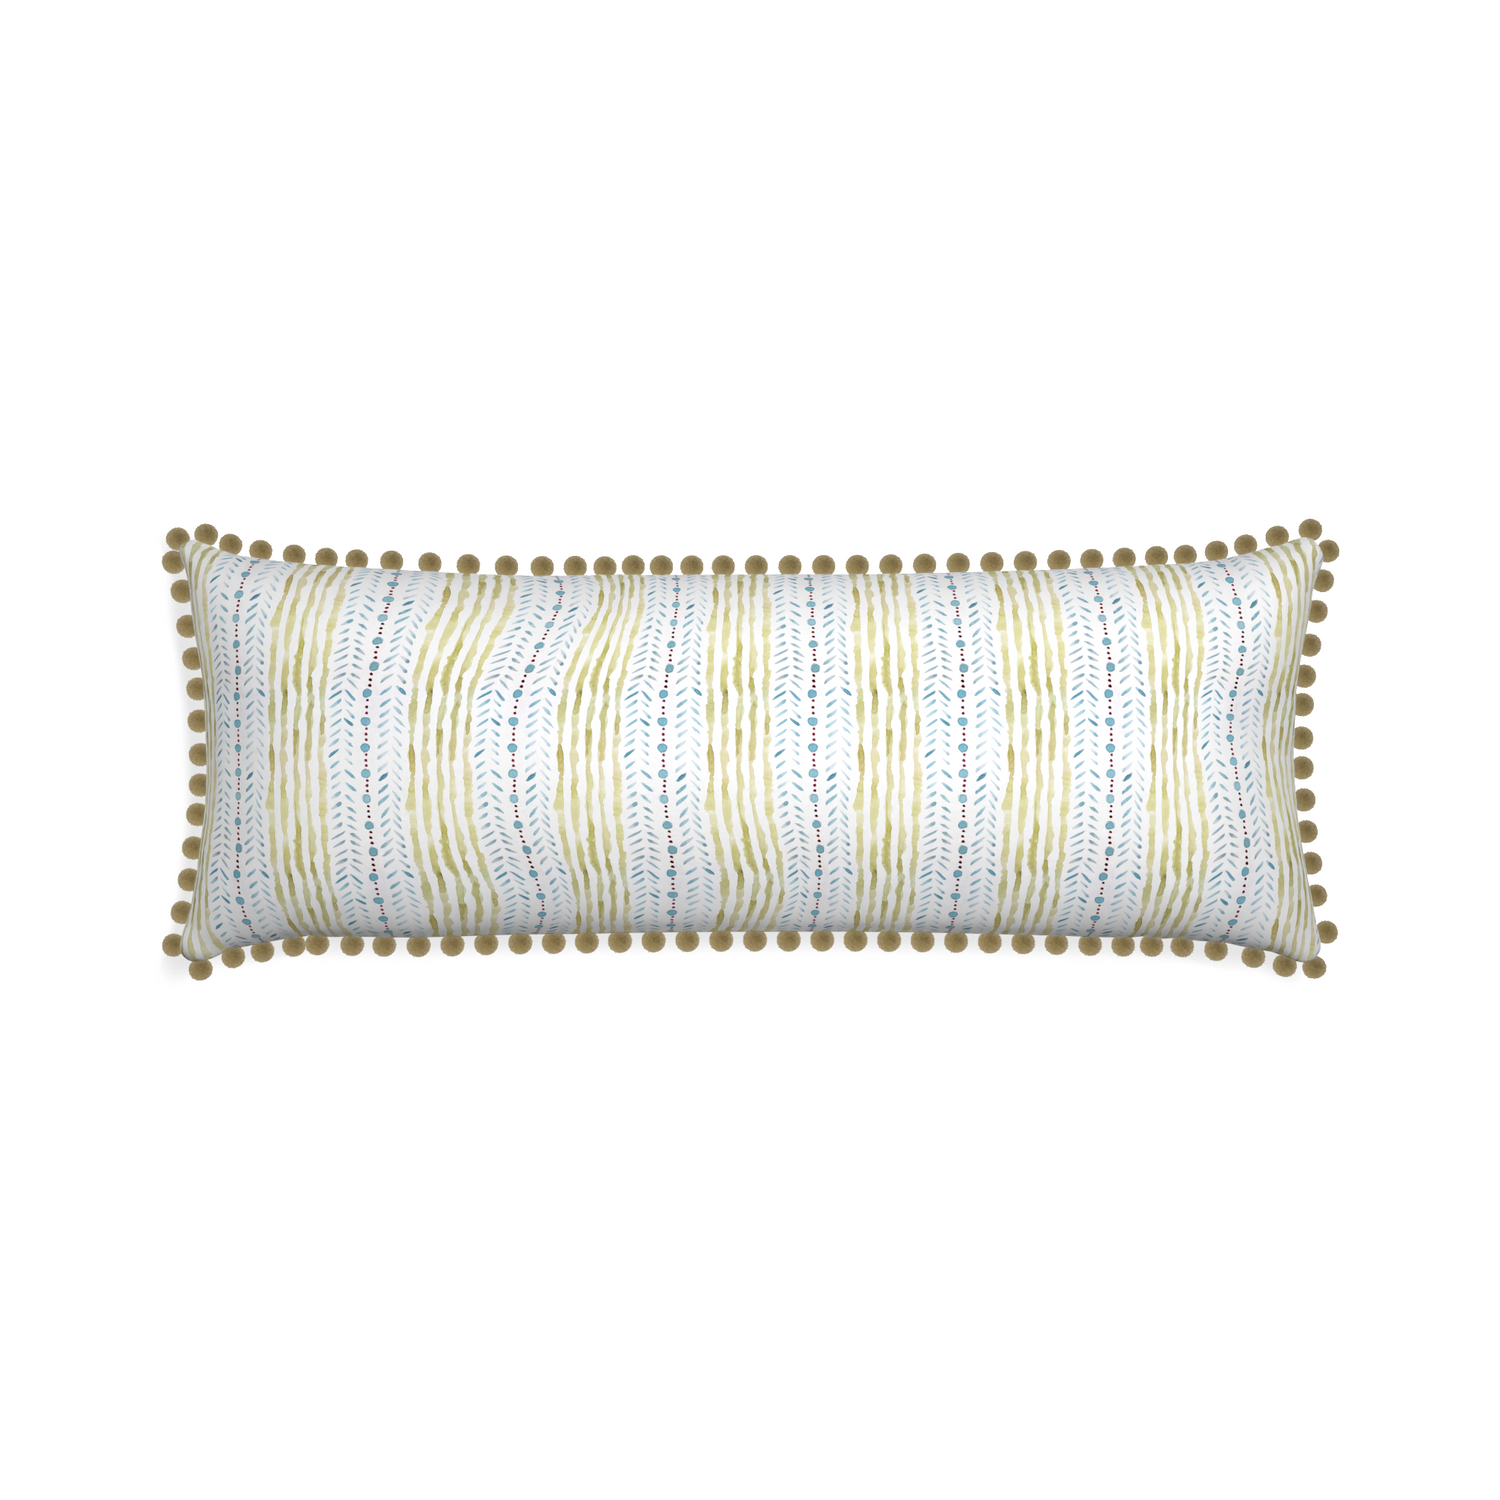 Xl-lumbar julia custom blue & green stripedpillow with olive pom pom on white background